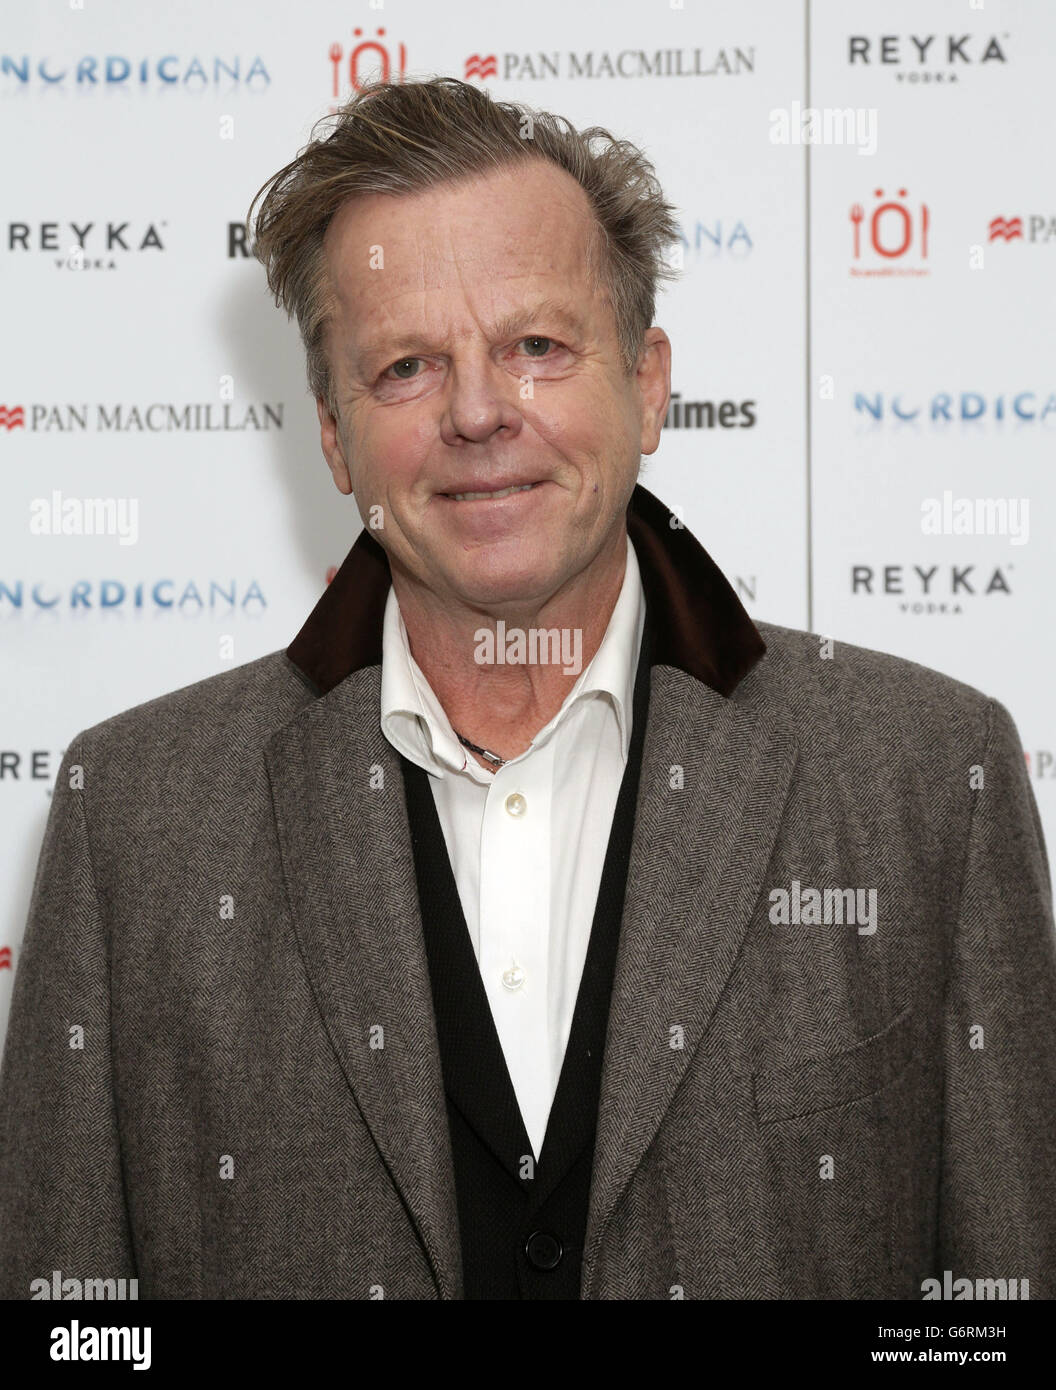 Wallander star Krister Henriksson during a photocall at Nordicana 2014, an event celebrating Nordic fiction, television and film, held at the Old Truman Brewery in Brick Lane, London. Stock Photo